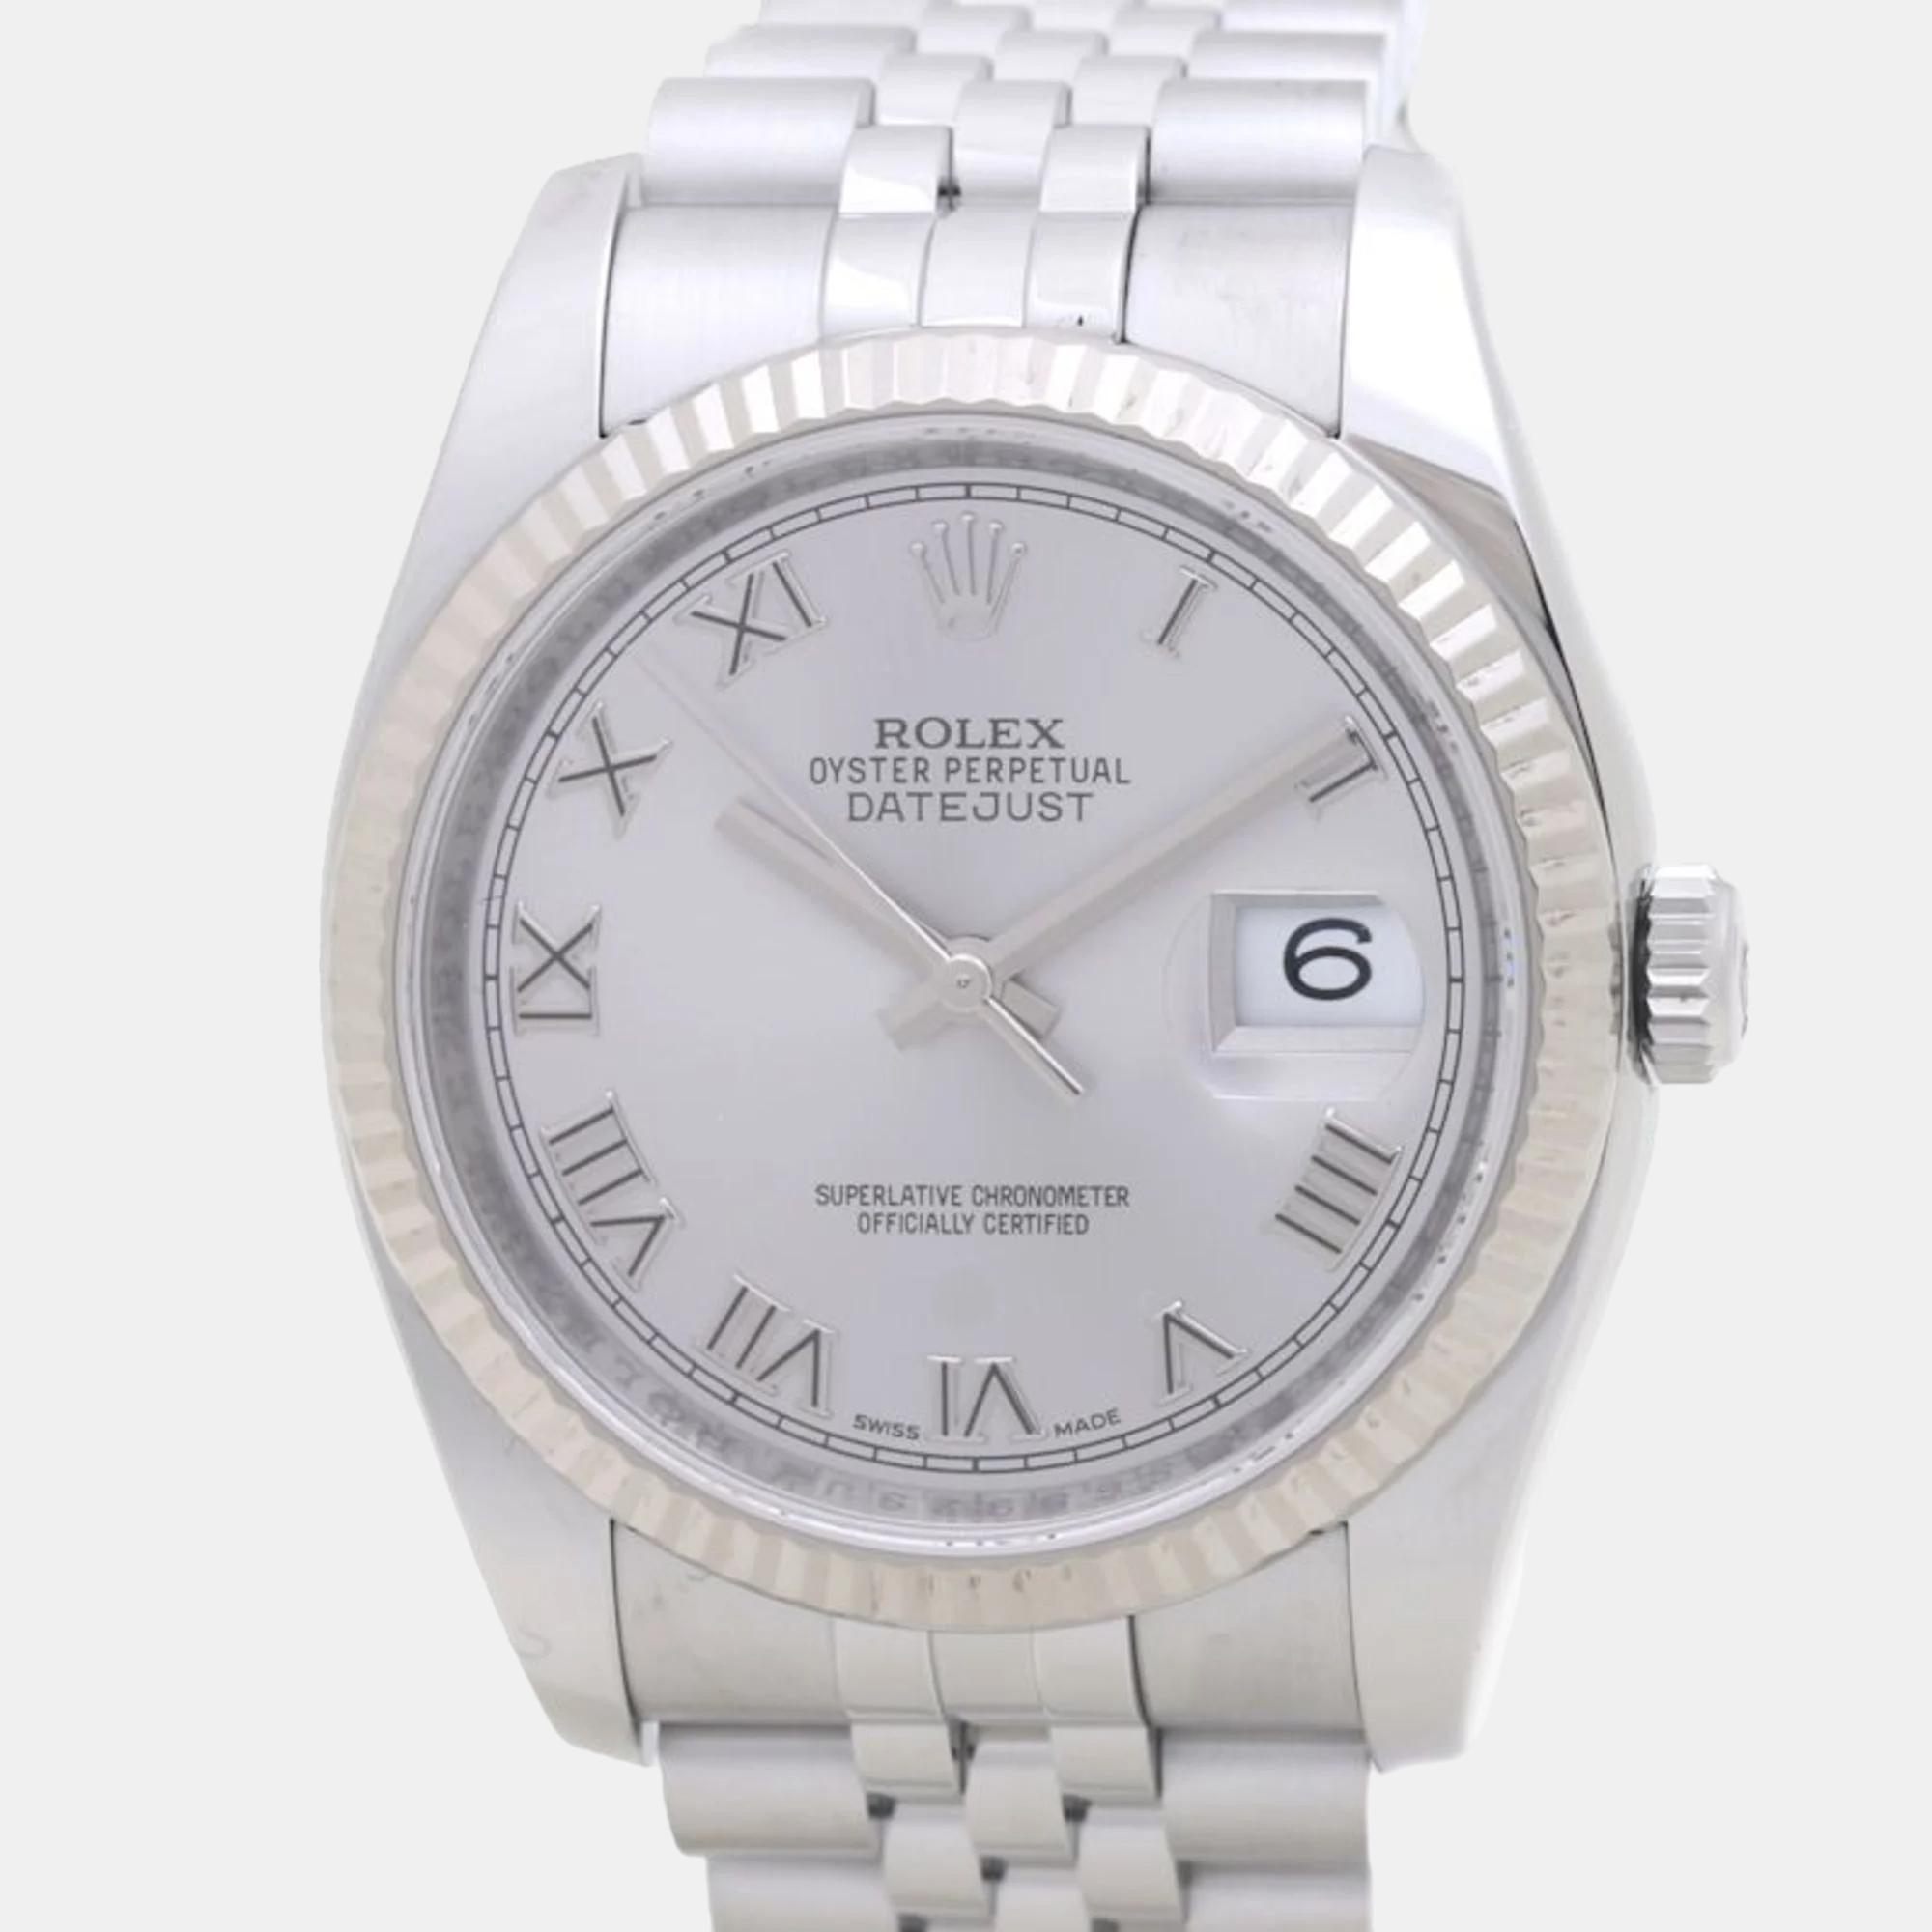 Pre-owned Rolex Silver 18k White Gold Stainless Steel Datejust 116234 Automatic Men's Wristwatch 36 Mm